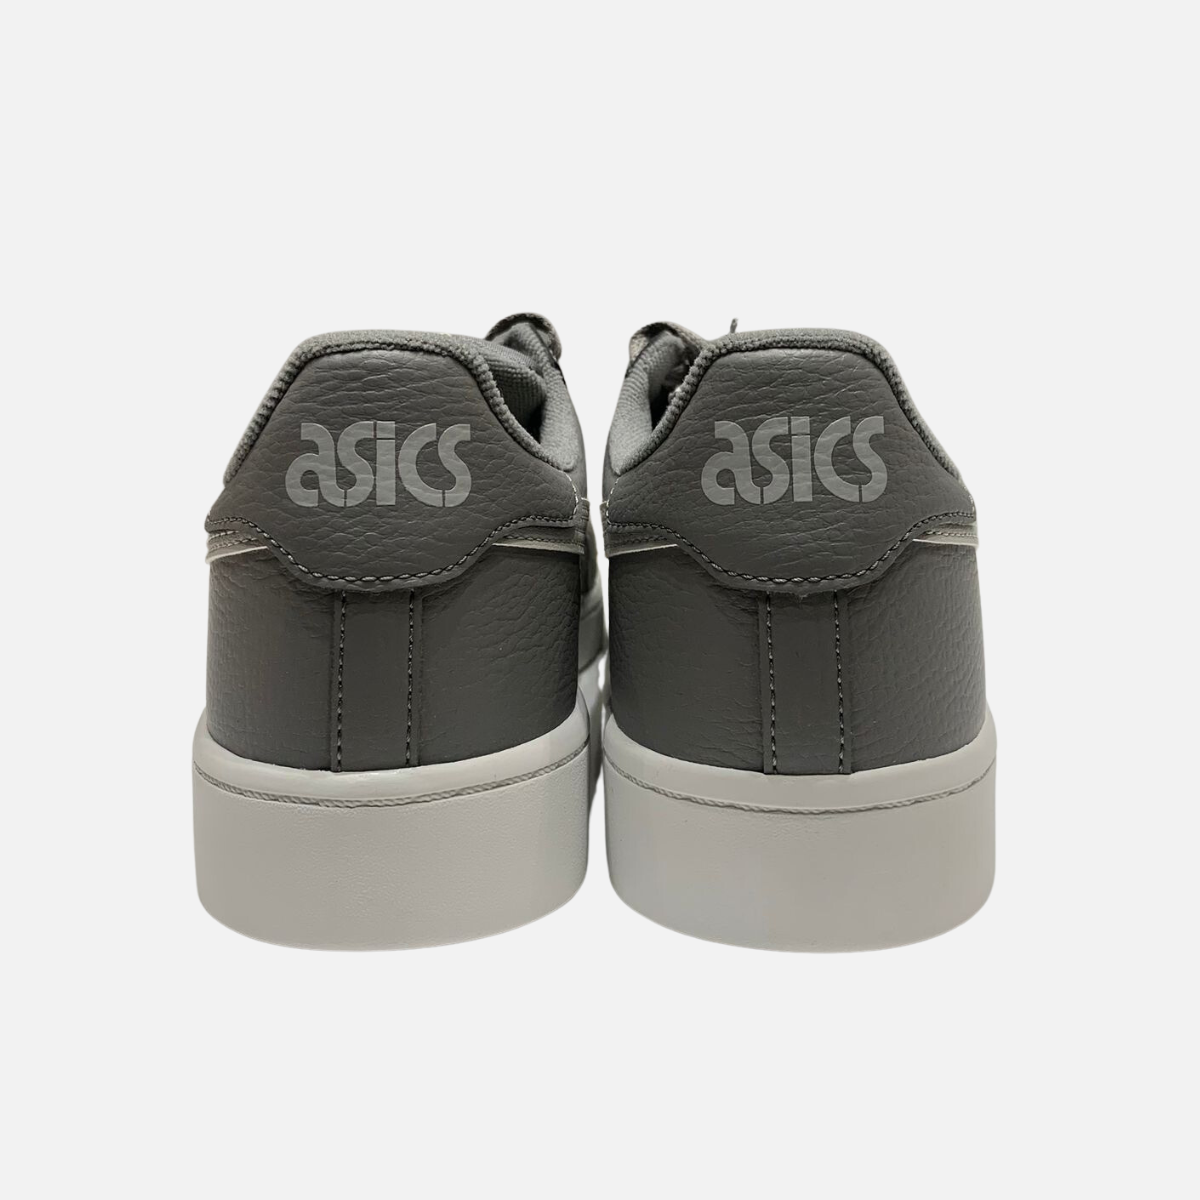 Asics JAPAN S Men's Lifestyle Shoes -Clay/Grey/Oyster Grey